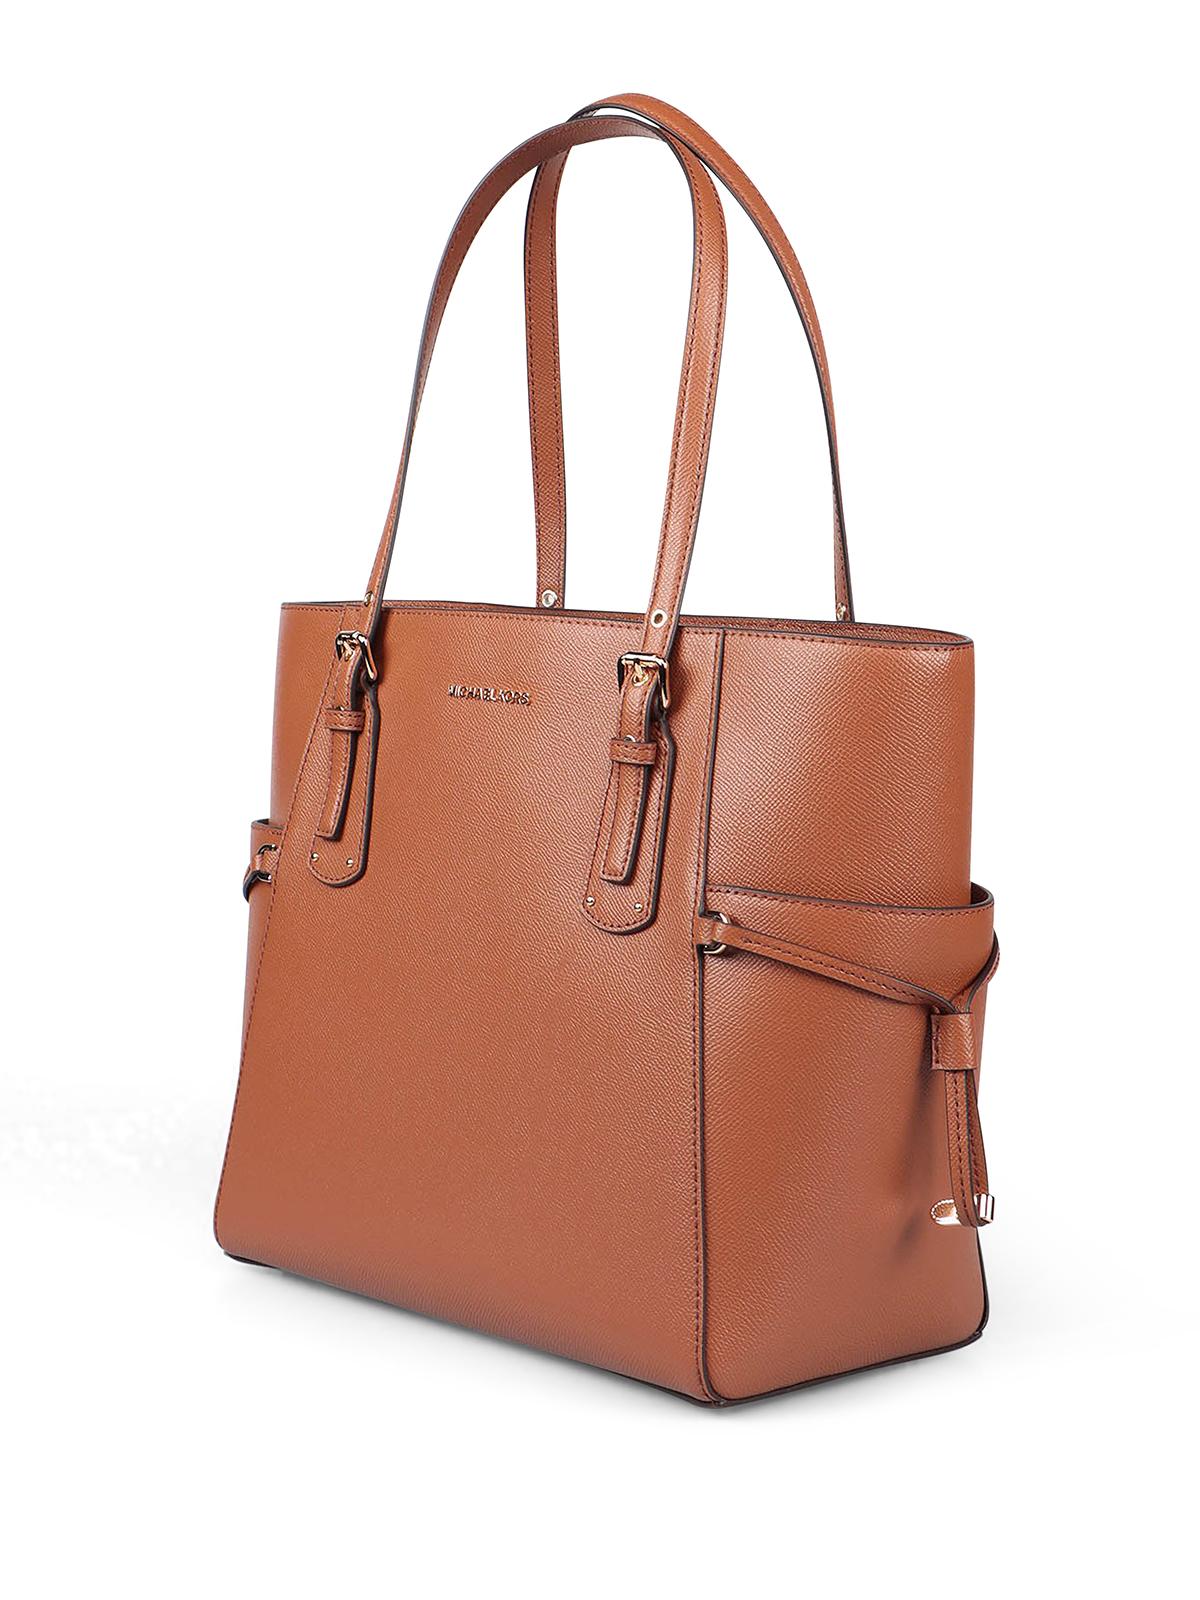 MICHAEL KORS: tote bags for woman - Leather  Michael Kors tote bags  30H7GV6T9L online at